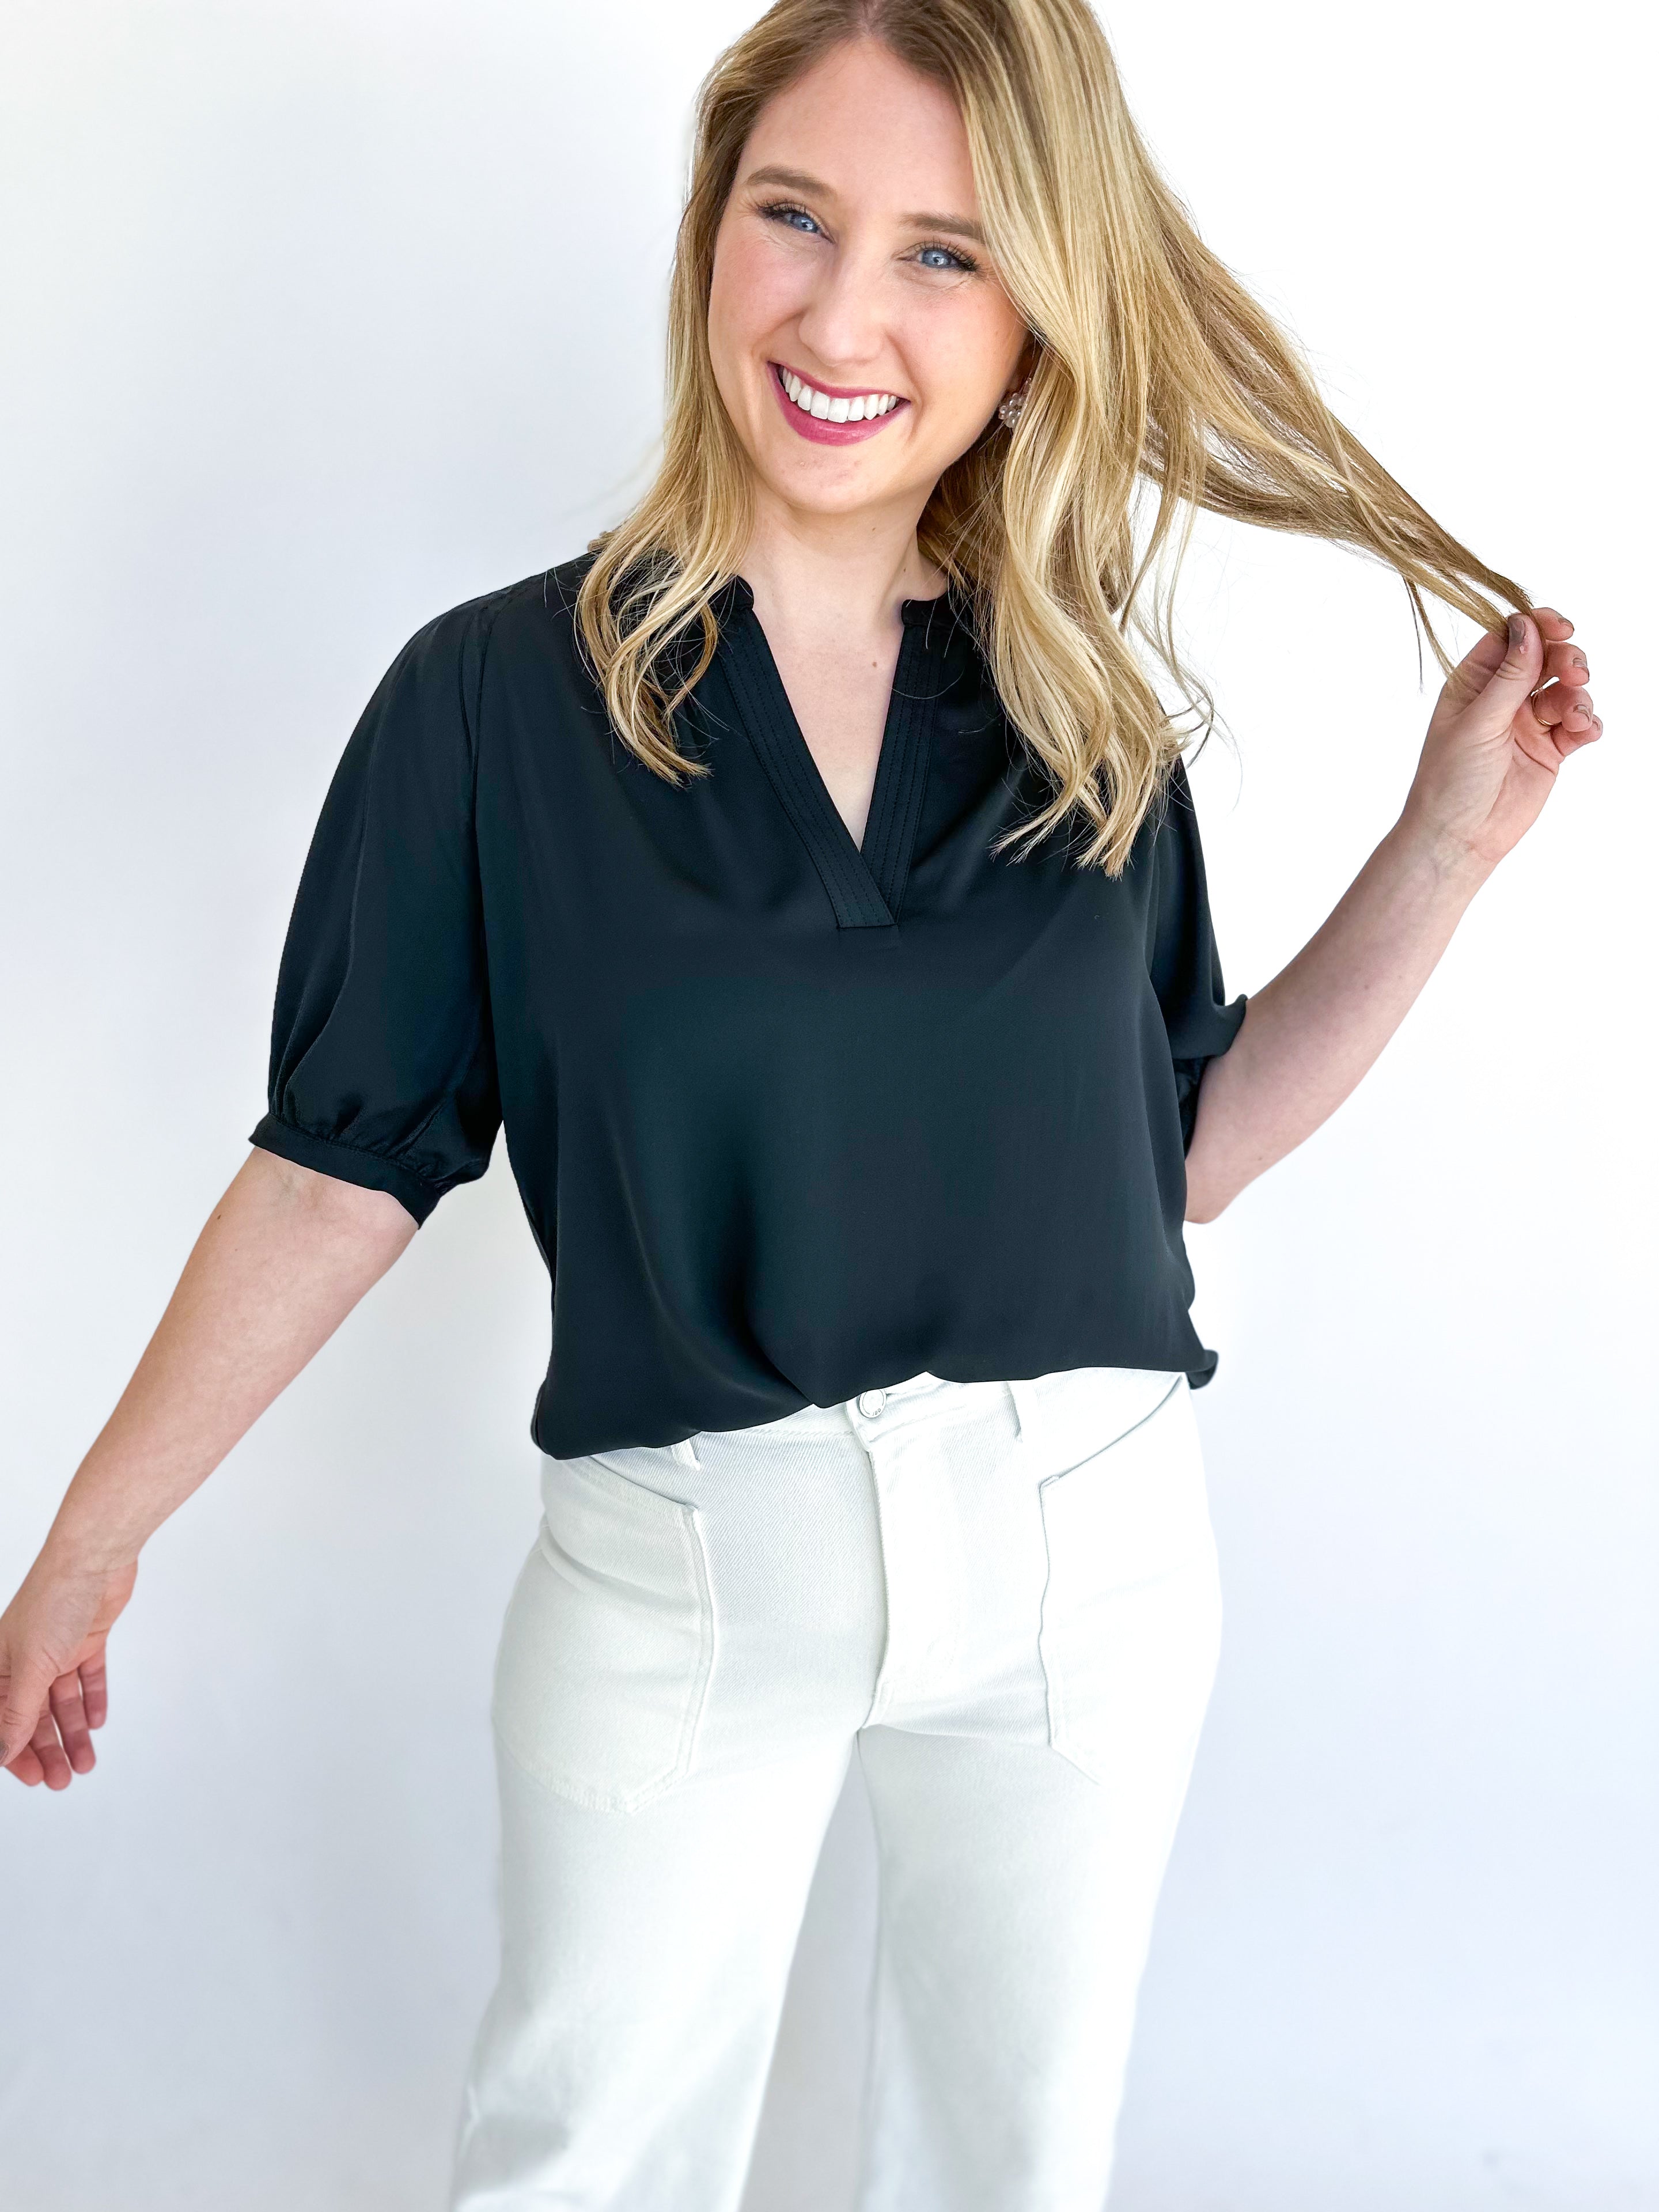 Quince Blouse - Black-200 Fashion Blouses-CURRENT AIR CLOTHING-July & June Women's Fashion Boutique Located in San Antonio, Texas